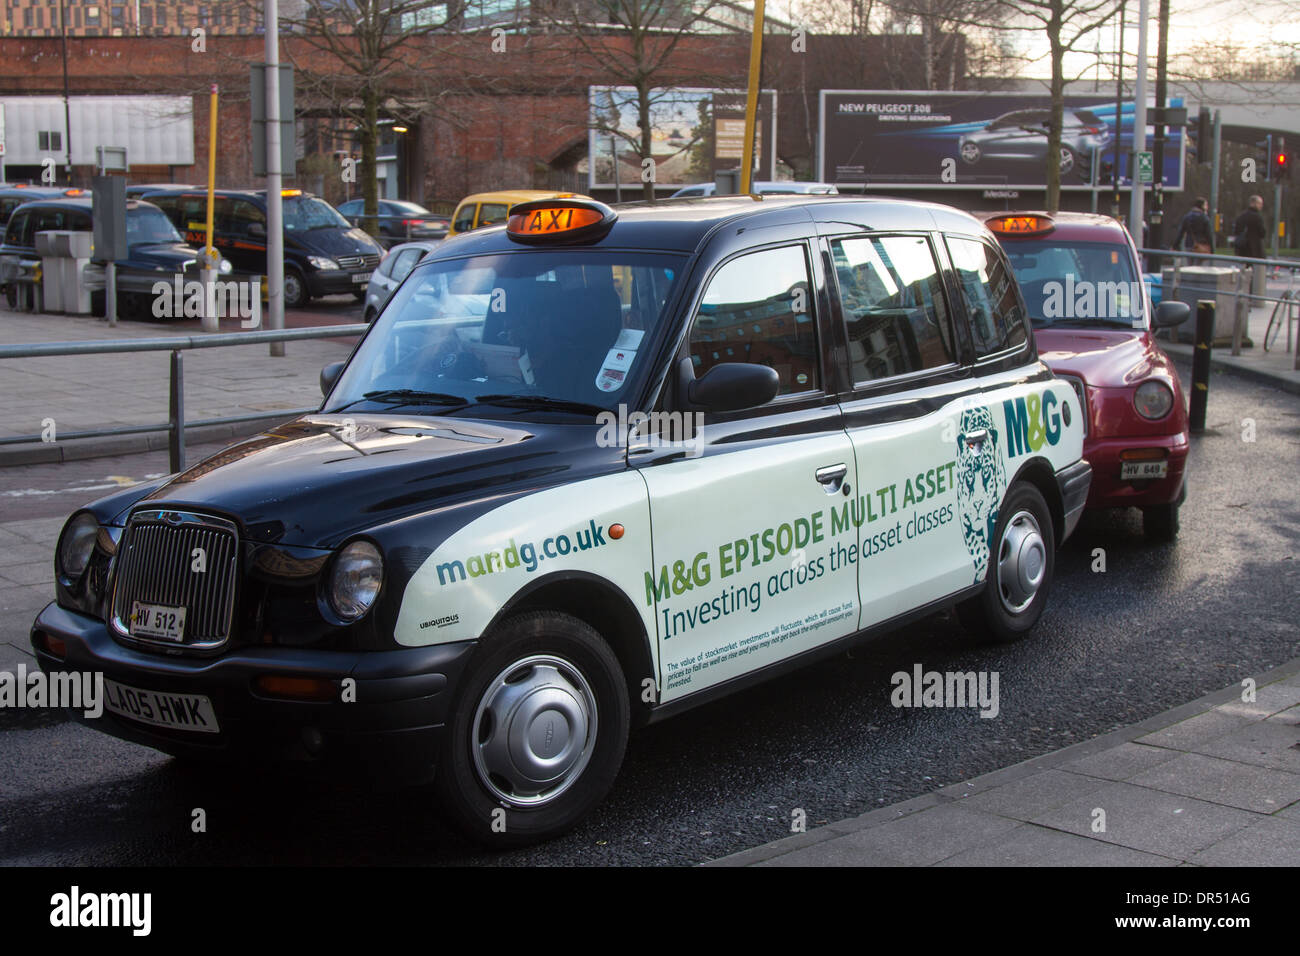 Hackney Cabs, Taxicab (hackney carriage), TX4  Private, Hire Vehicles for hire  Taxis in Manchester City Centre, Lancashire, UK Stock Photo